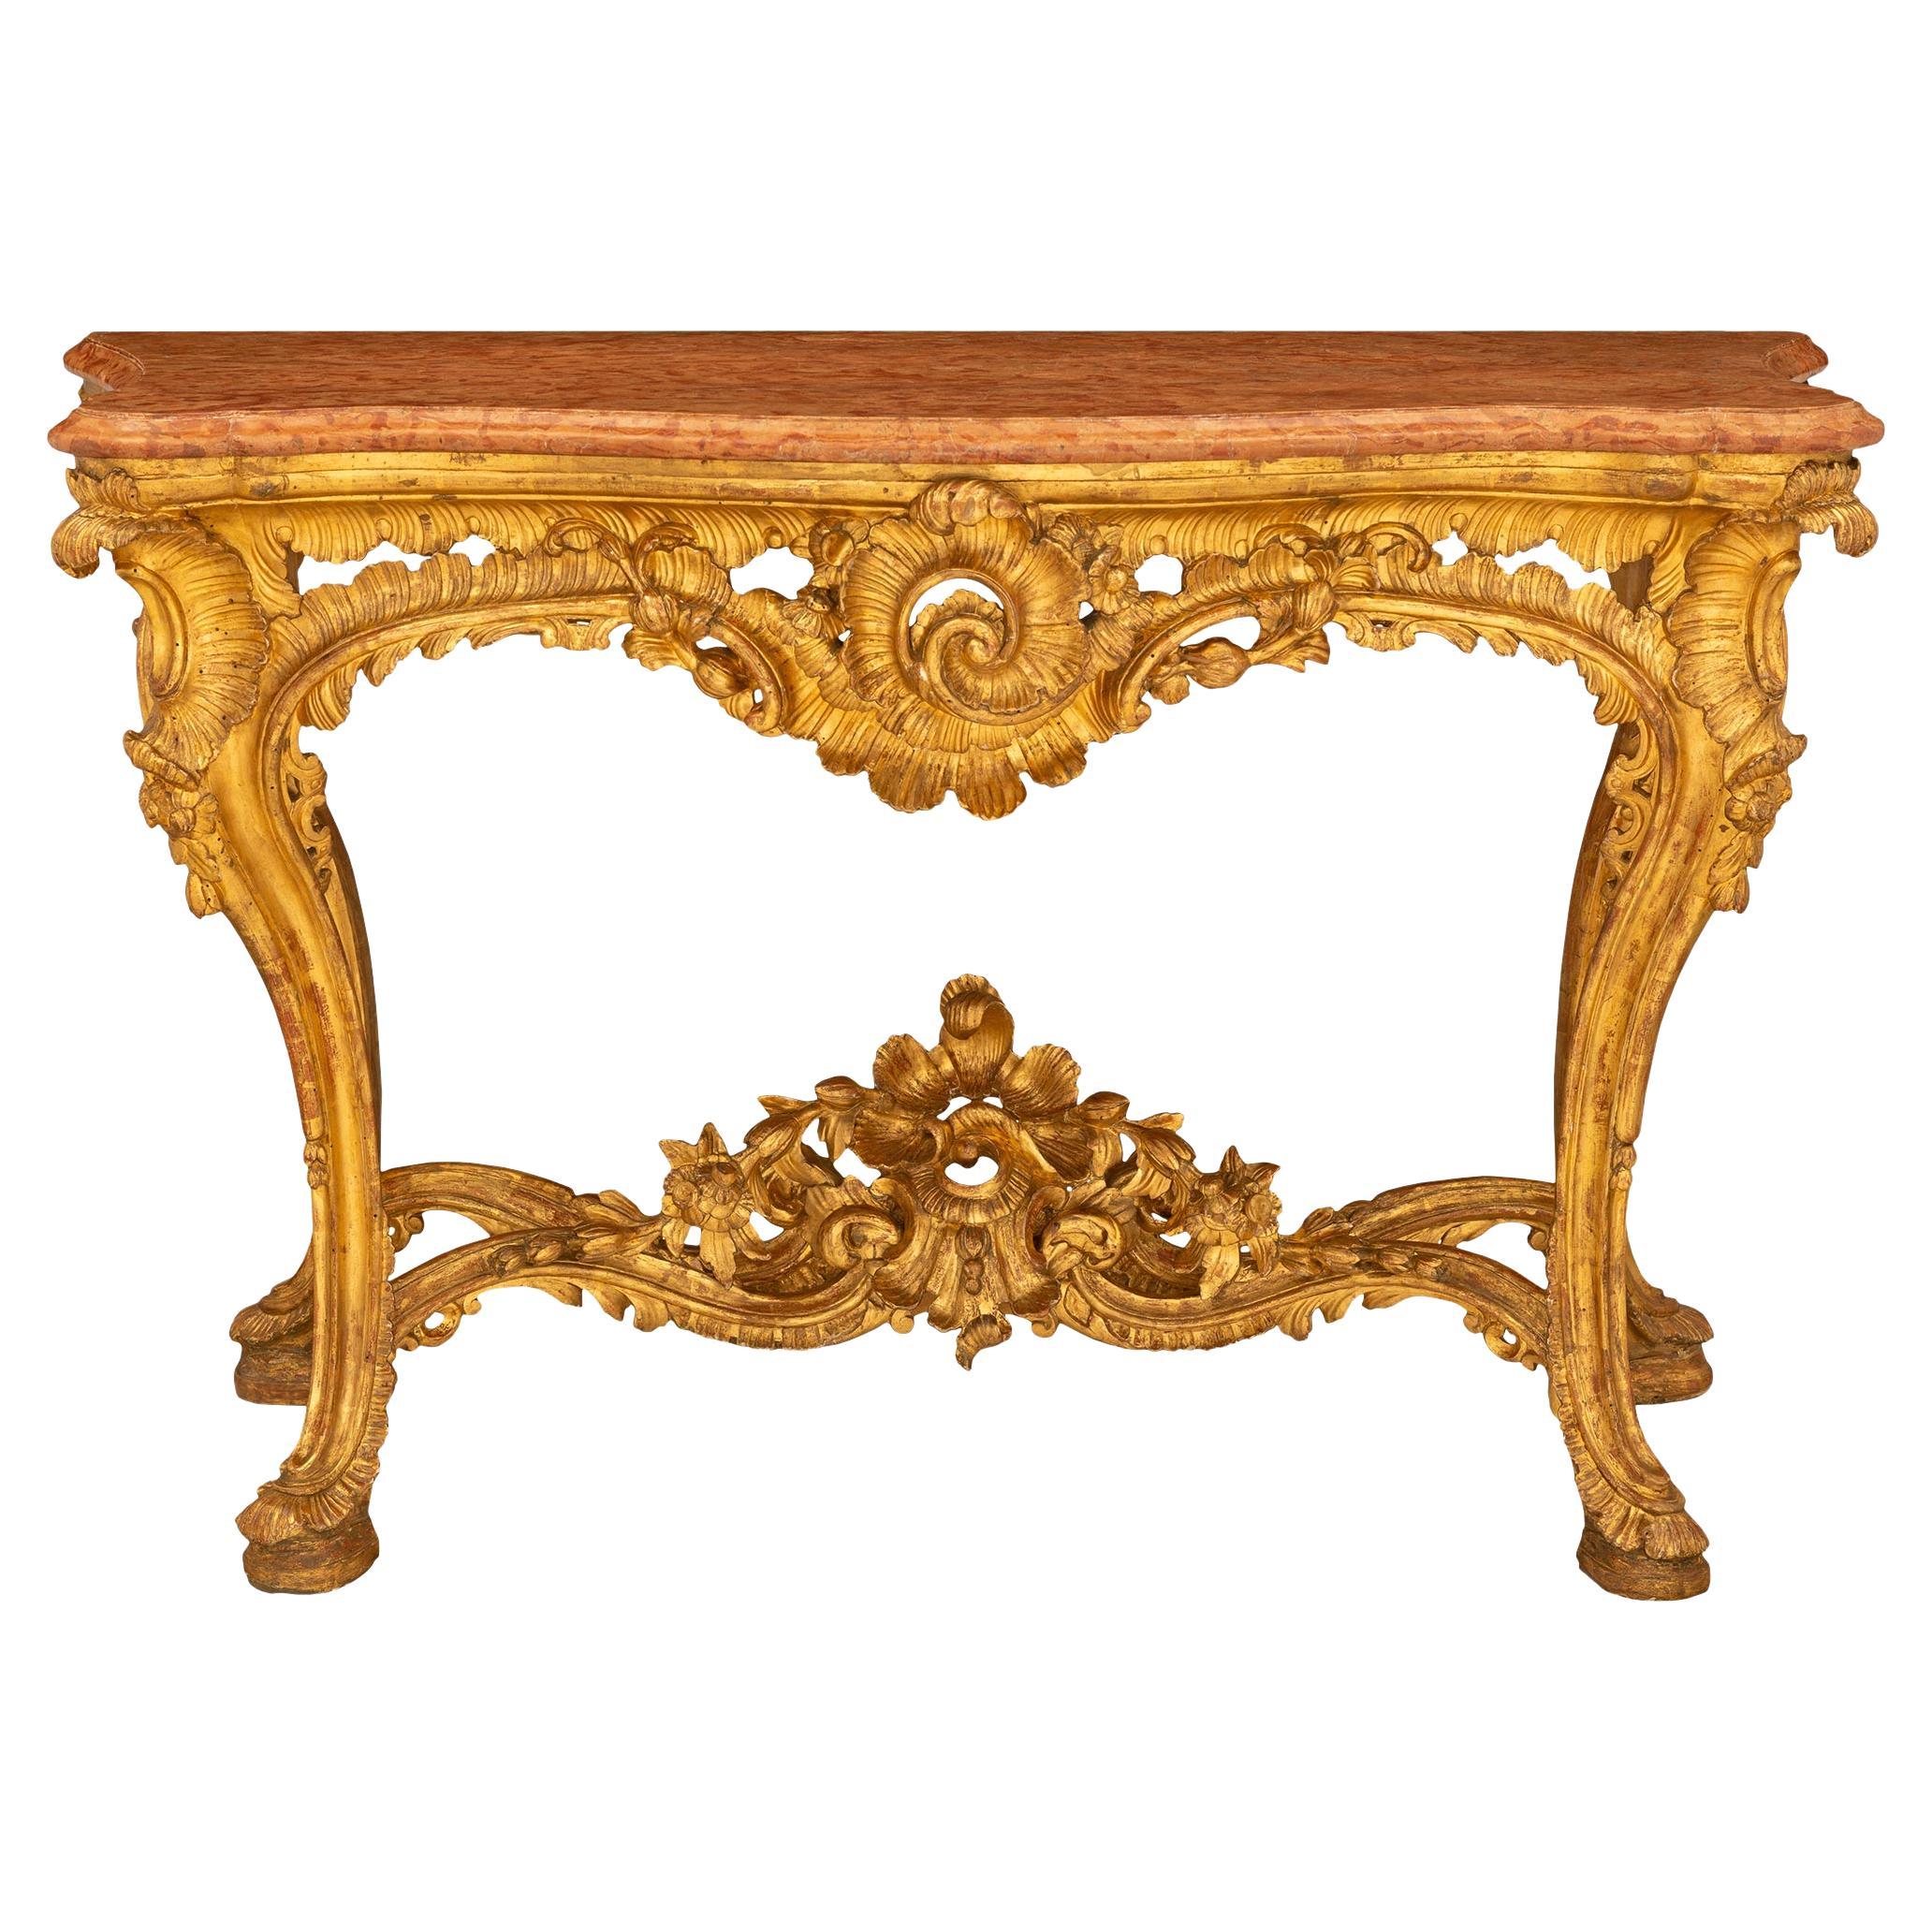 Early 18th Century Italian Napolitan Freestanding Giltwood Console